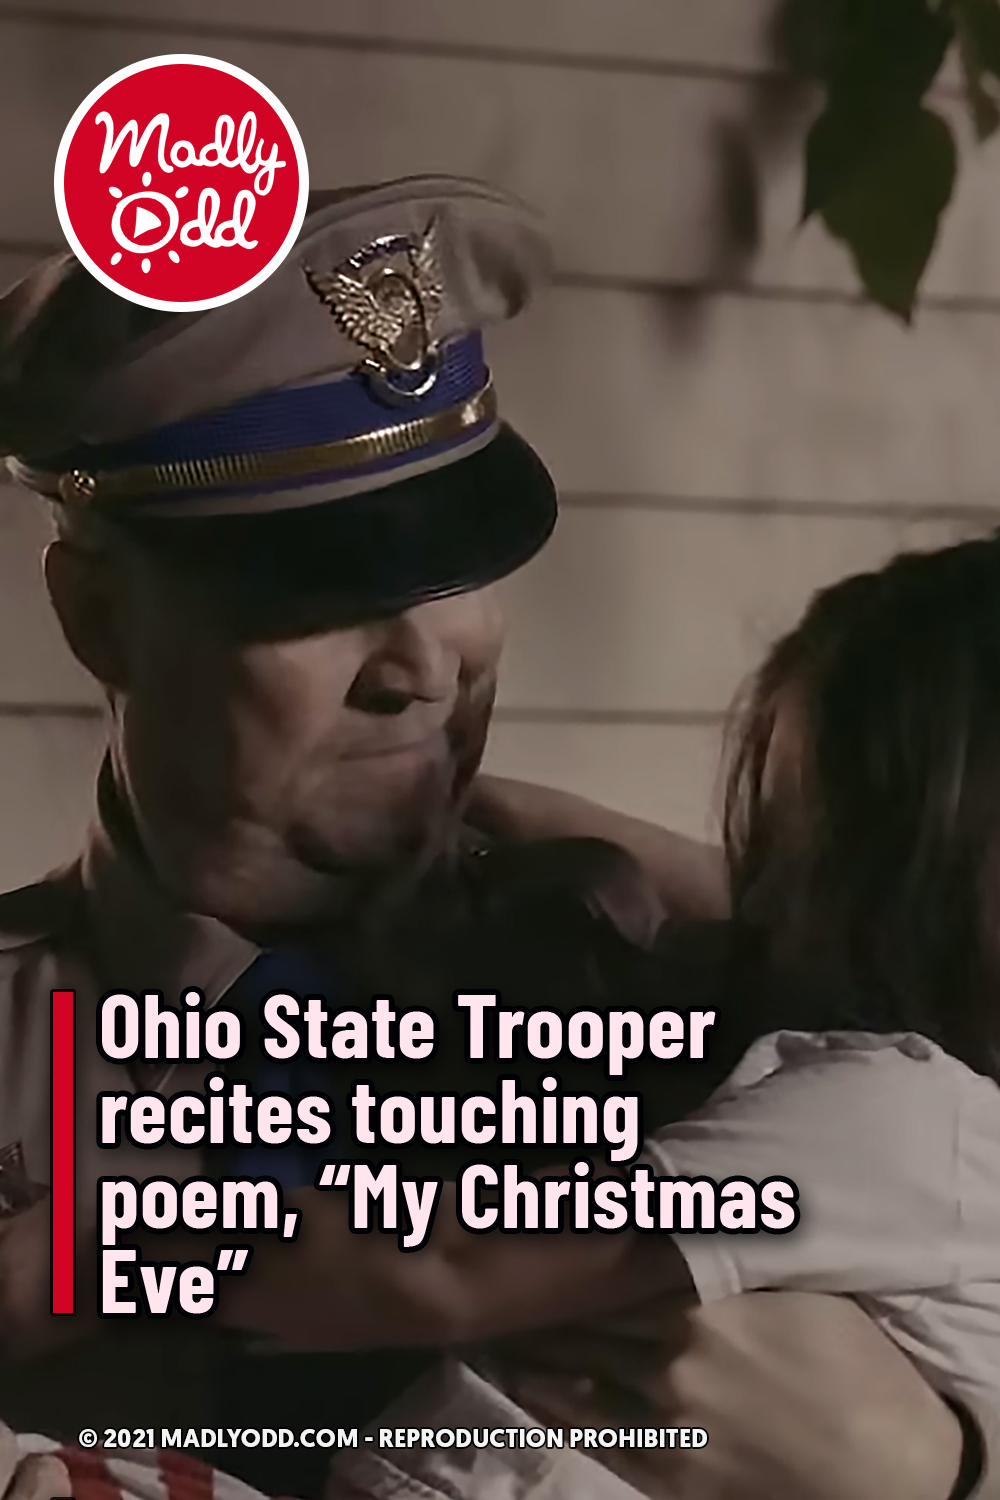 Ohio State Trooper recites touching poem, “My Christmas Eve”